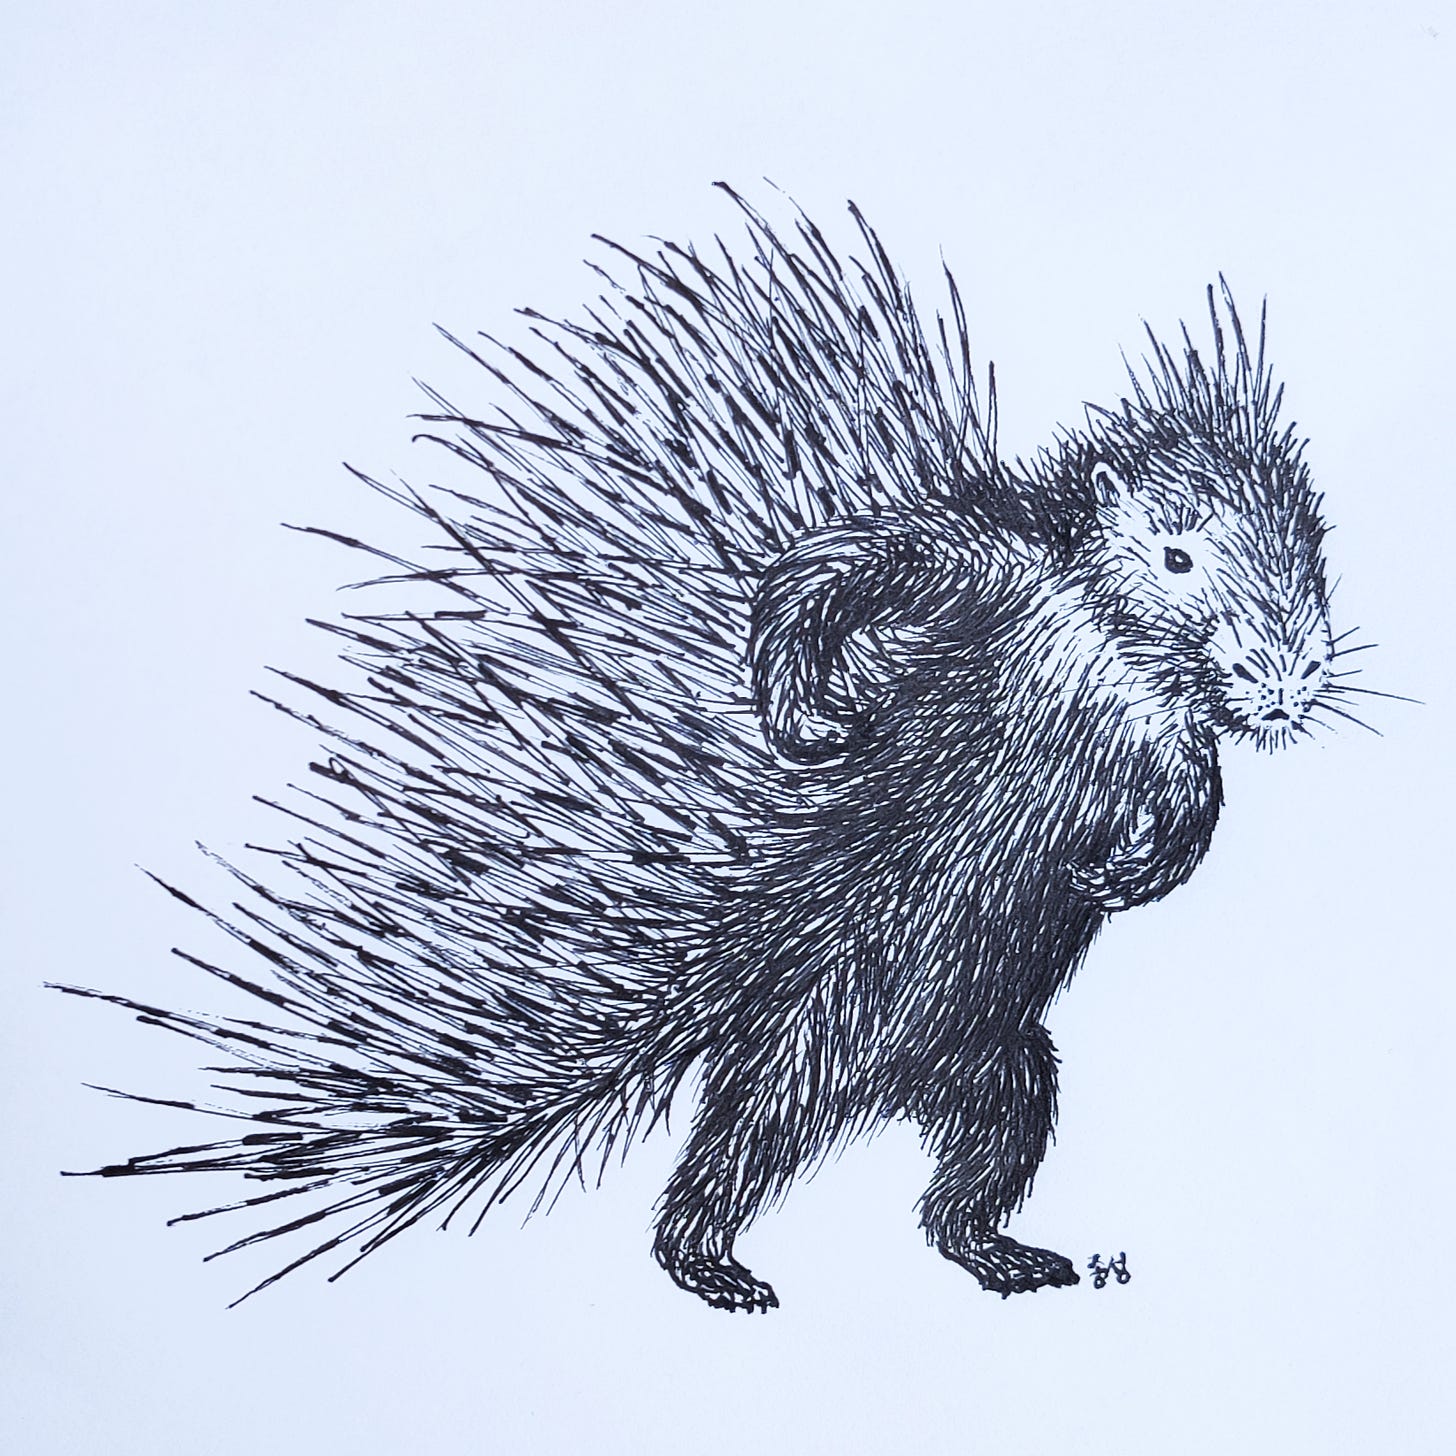 Pen and ink drawing of a porcupine